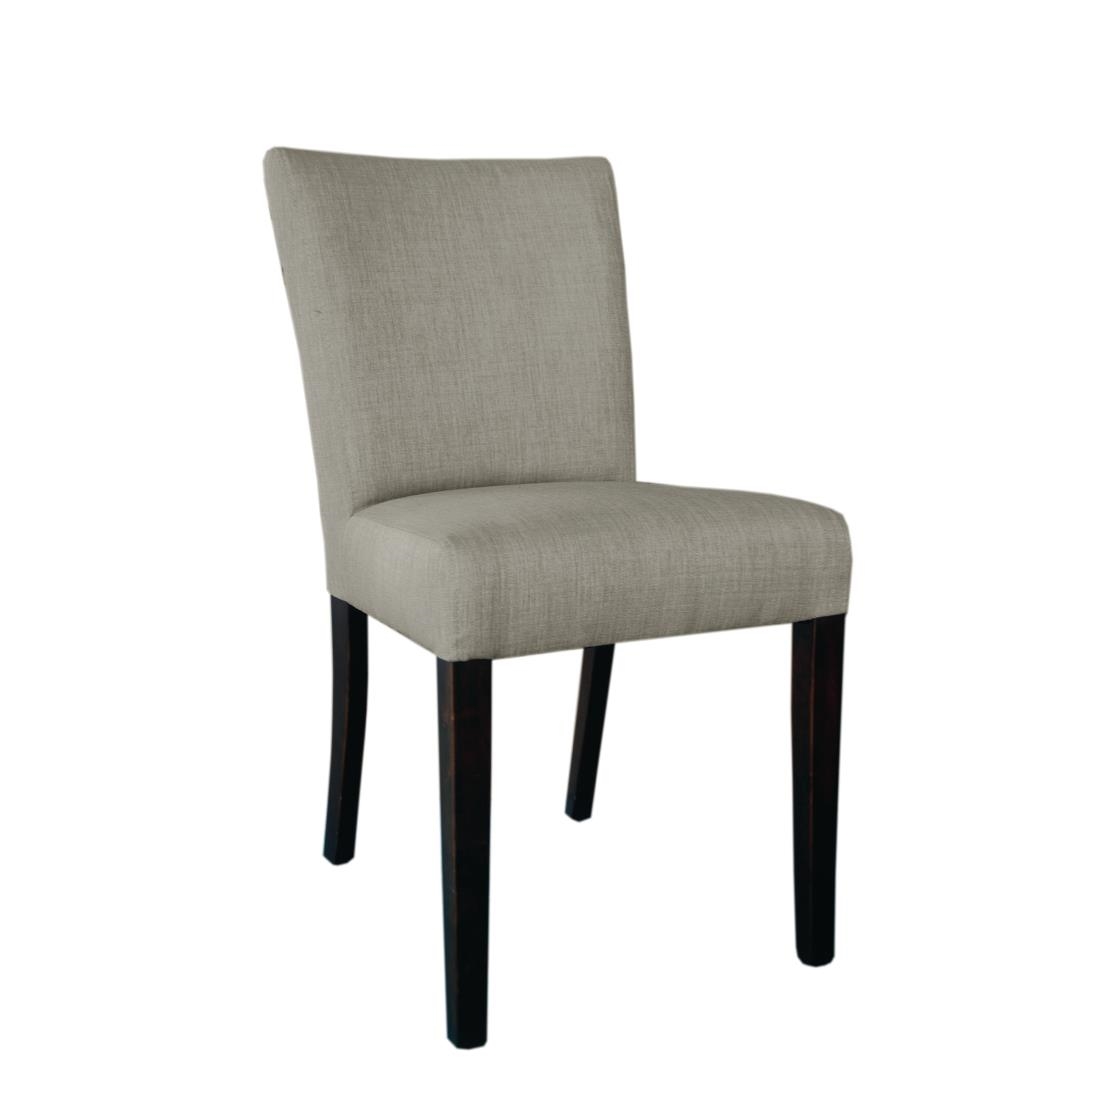 Contemporary Dining Chair - Natural Hessian